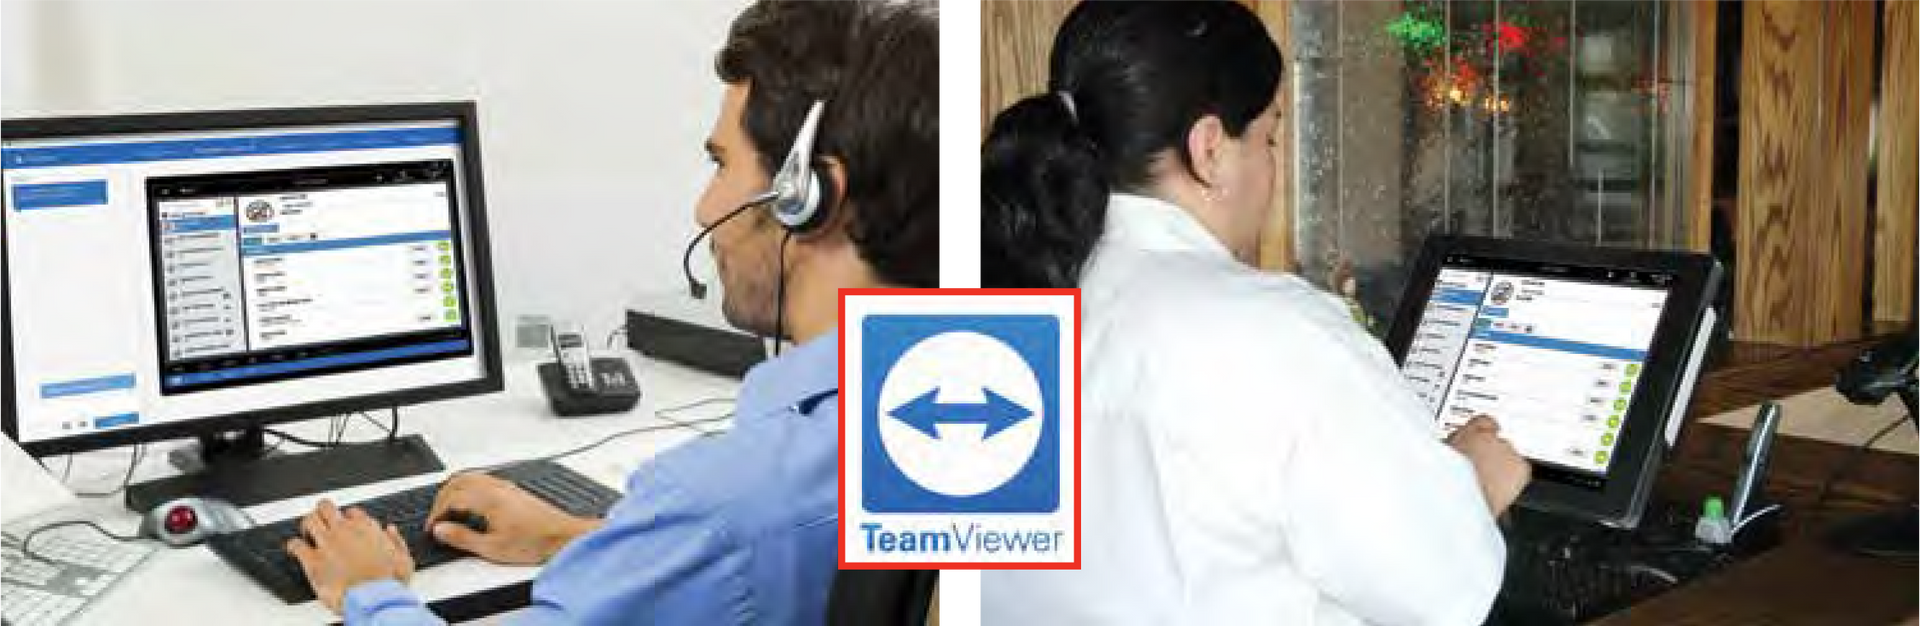 Remote Support With TeamViewer